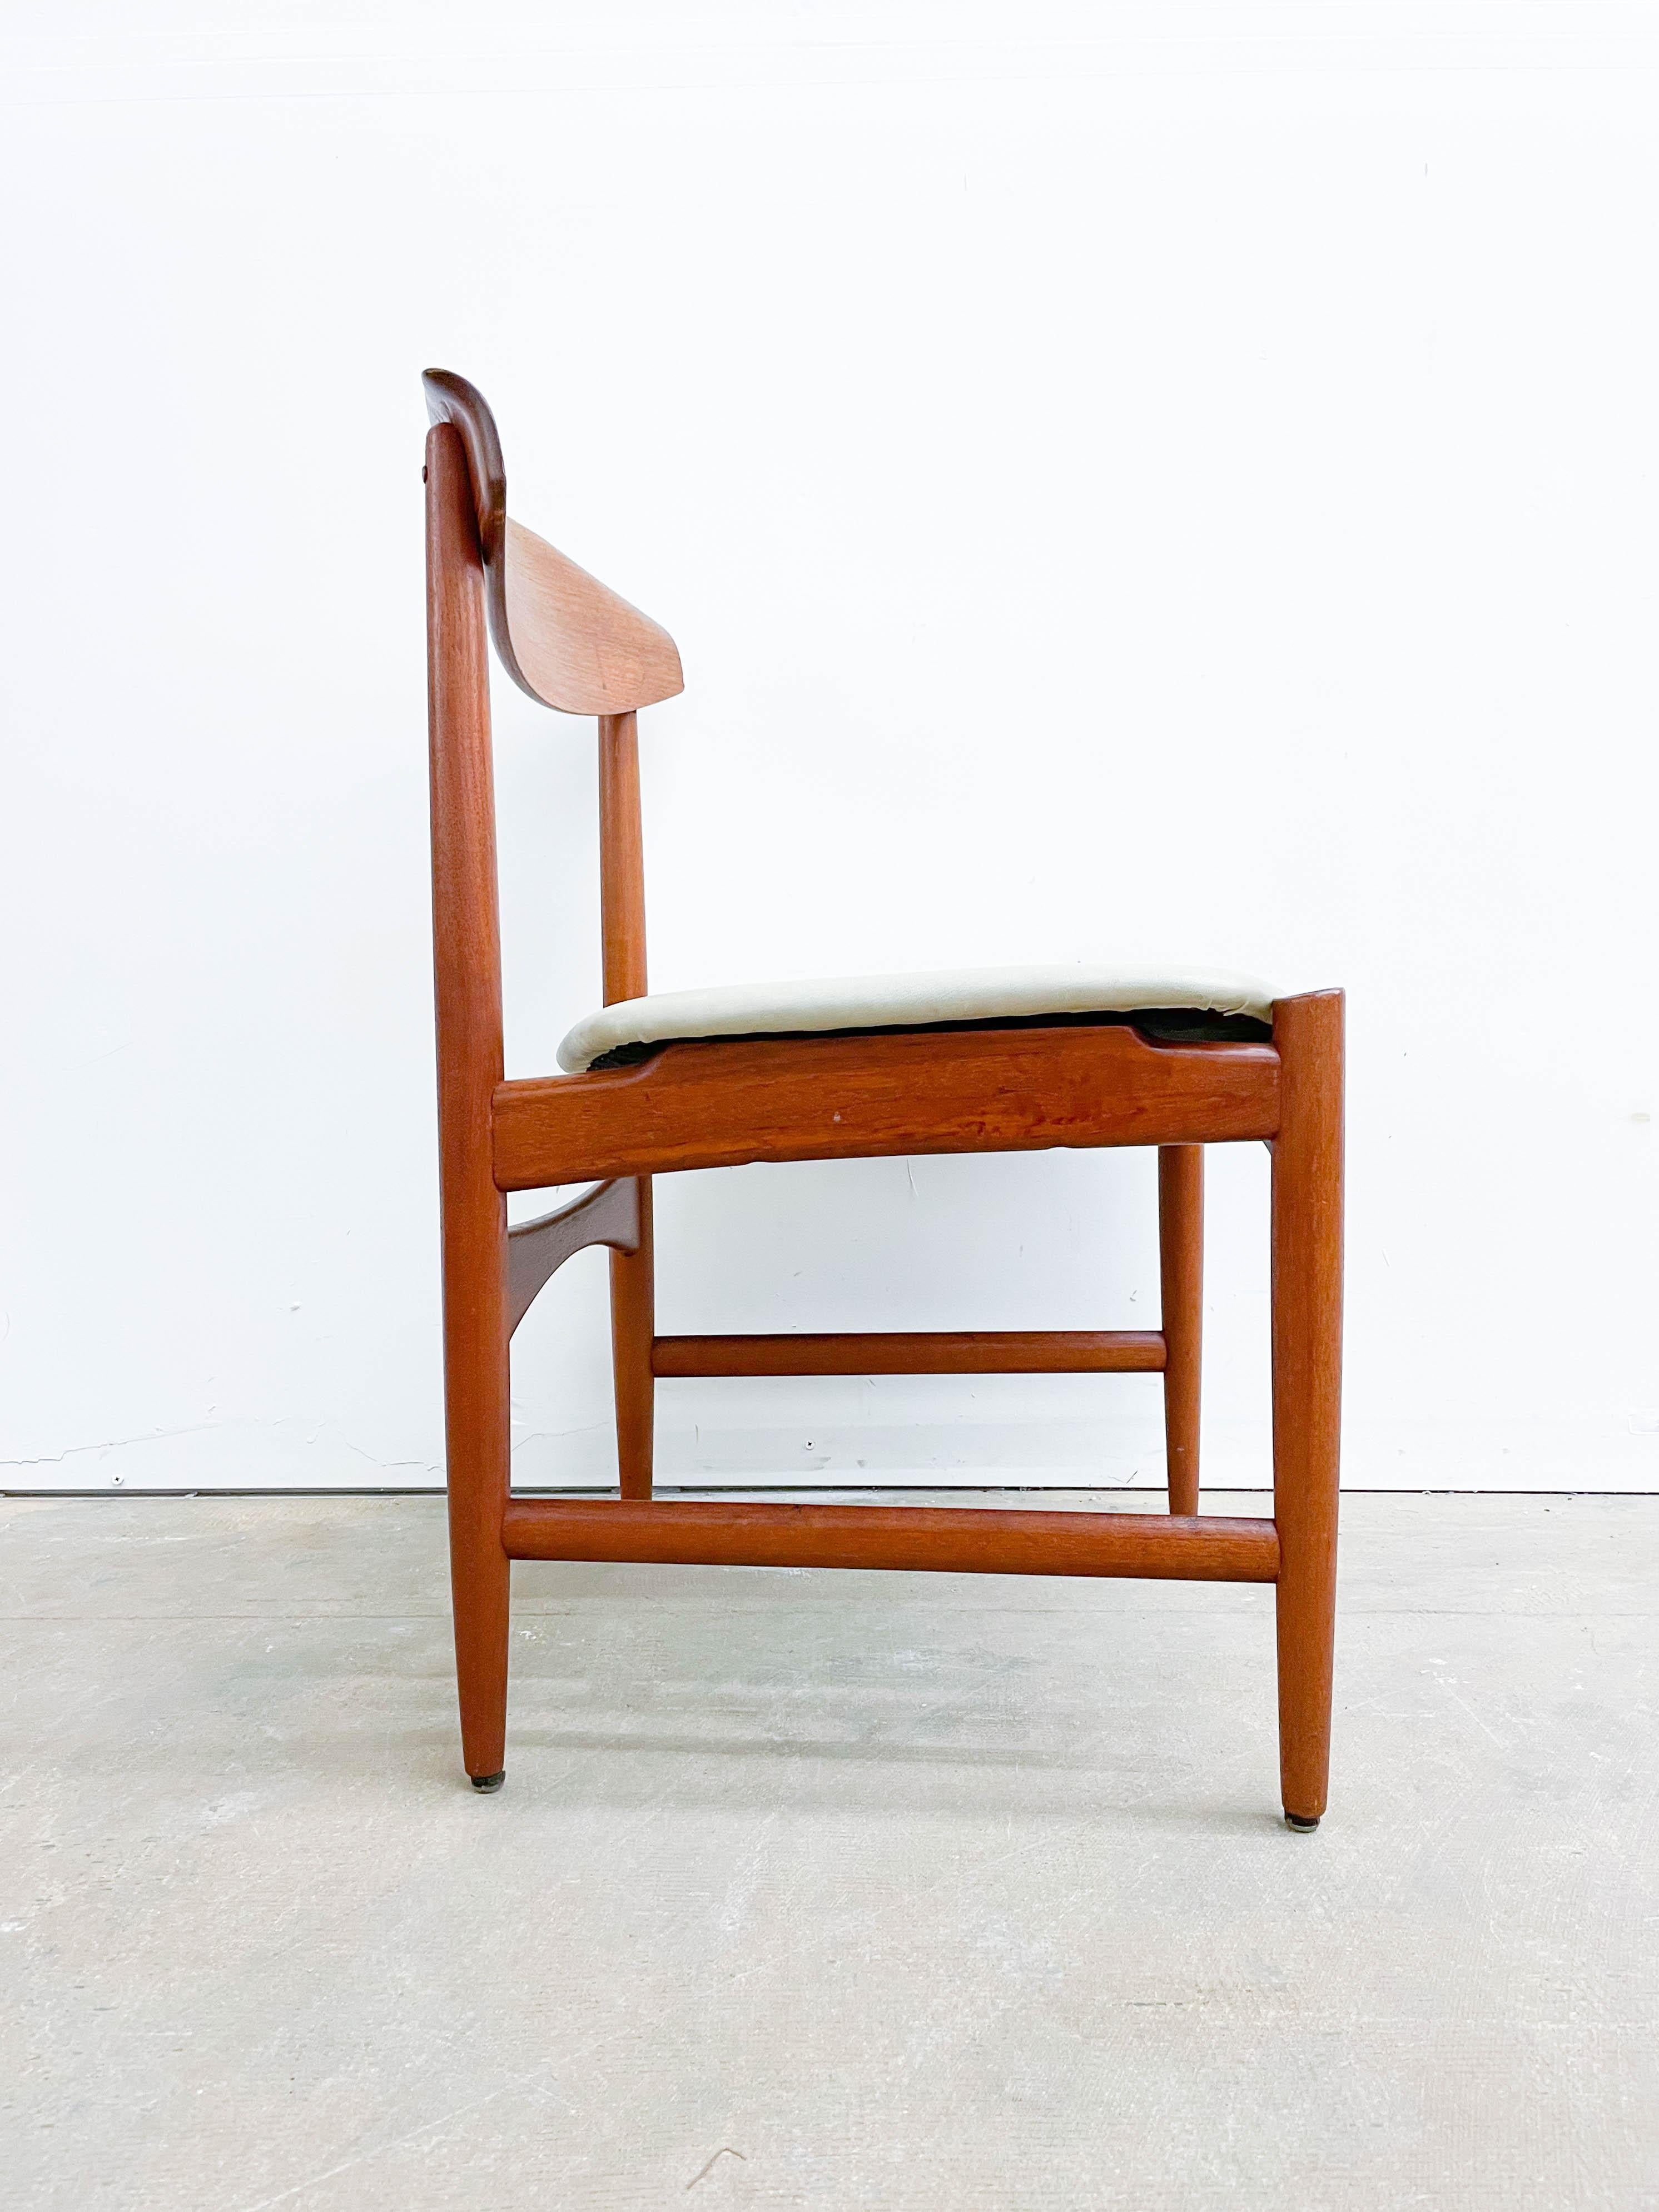 This is a rare example of a teak side chair with a bent wood back designed by Kofod Larsen and made and distributed by Selig. This is a stunning chair from the 1950s that is the epitome of Danish mid-century modern design.  The teak used is